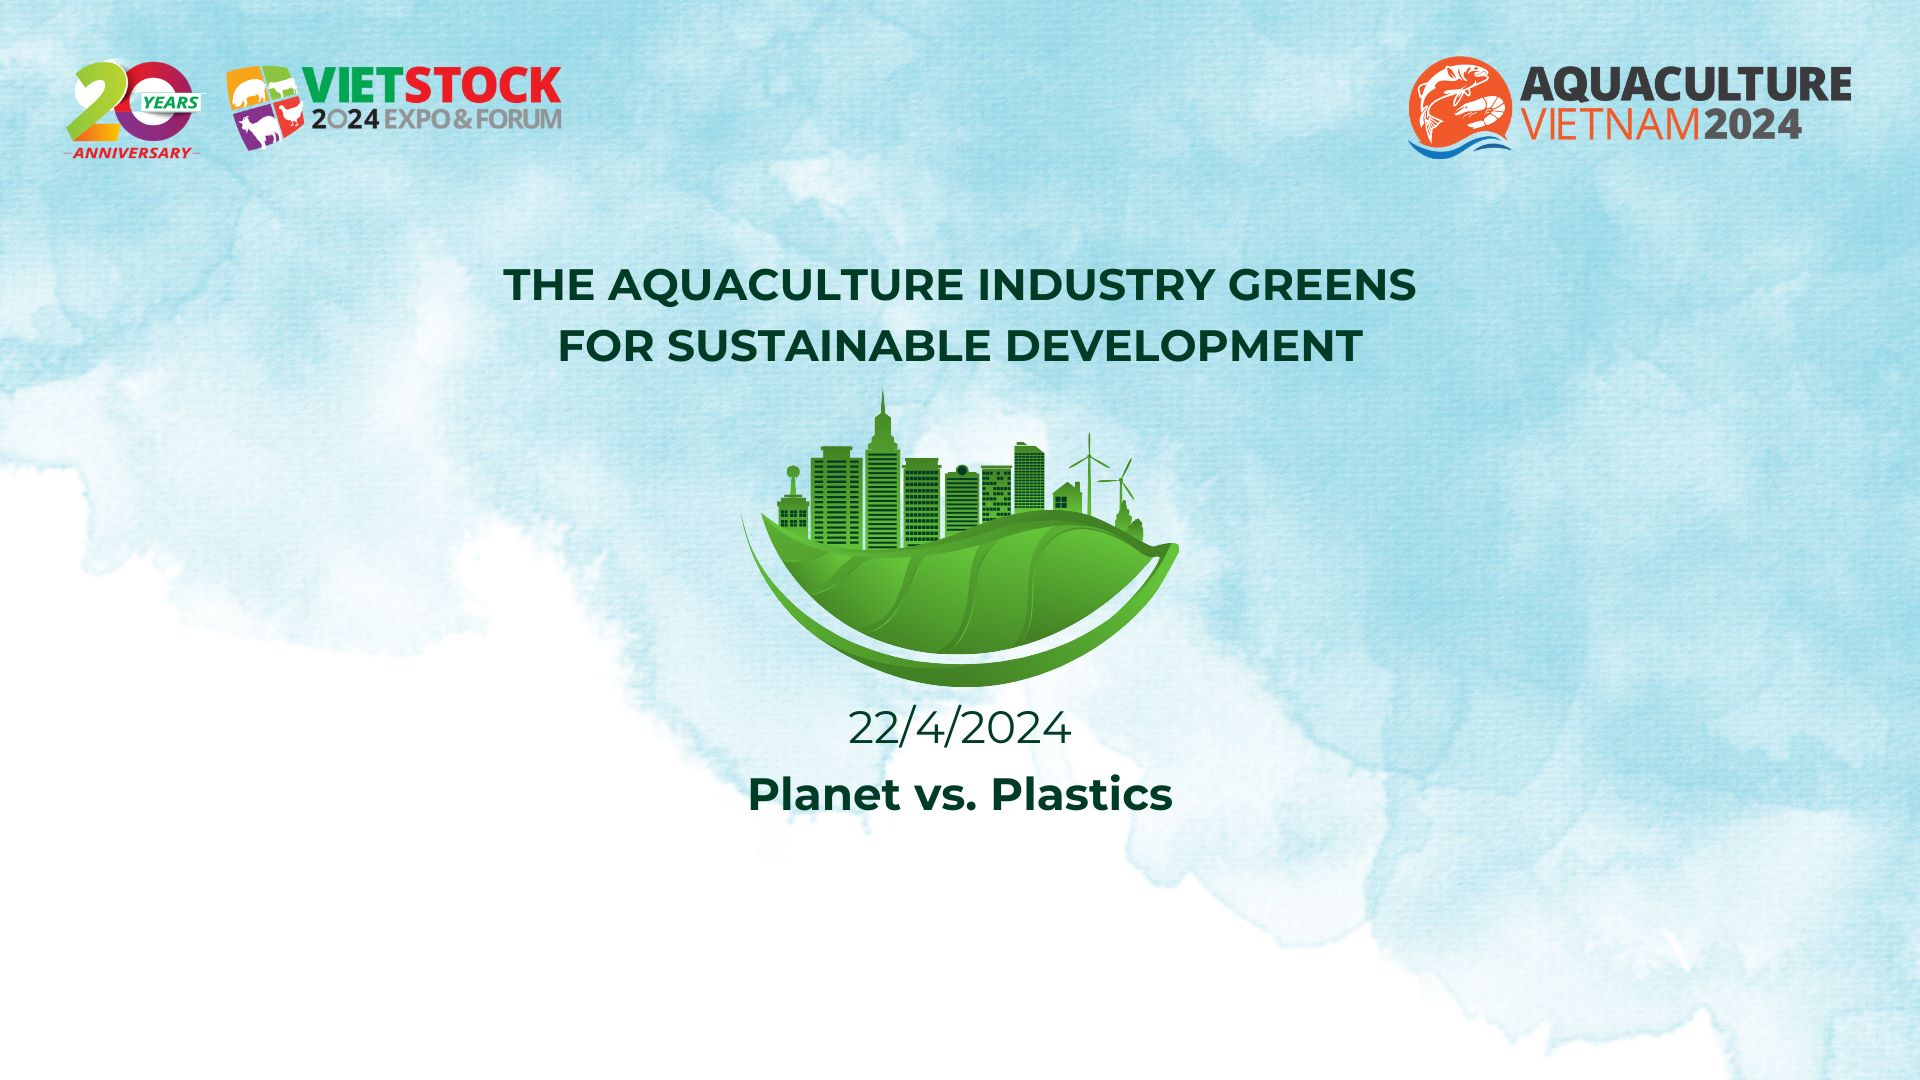 THE AQUACULTURE INDUSTRY GREENS FOR SUSTAINABLE DEVELOPMENT